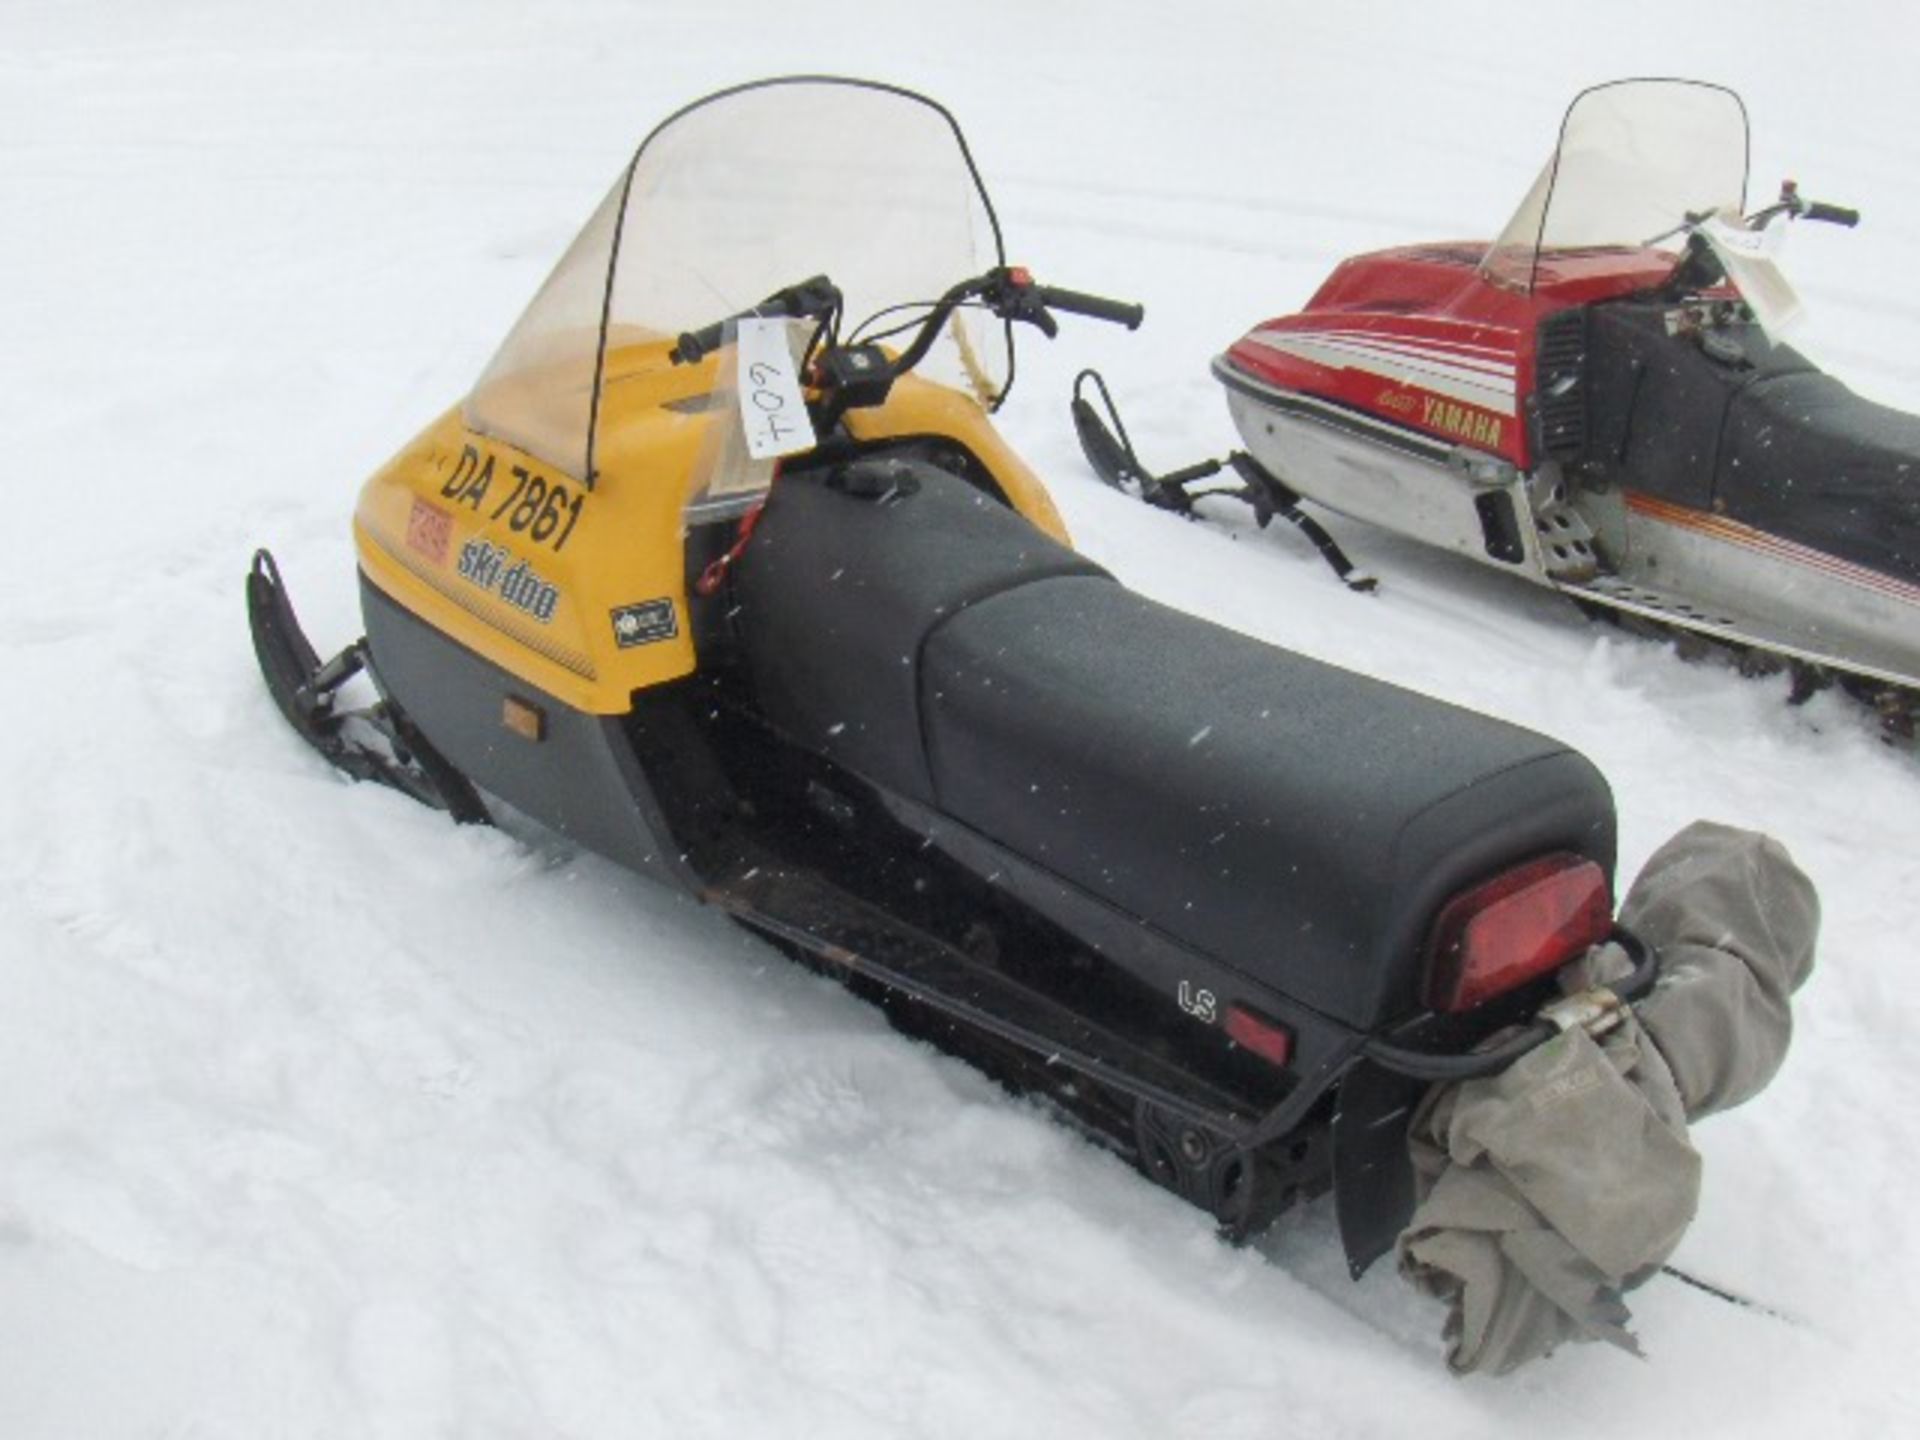 1987 SKI DOO 250 CITATION  321700320 snowmobile, owner started at time of auction check in, - Image 4 of 4